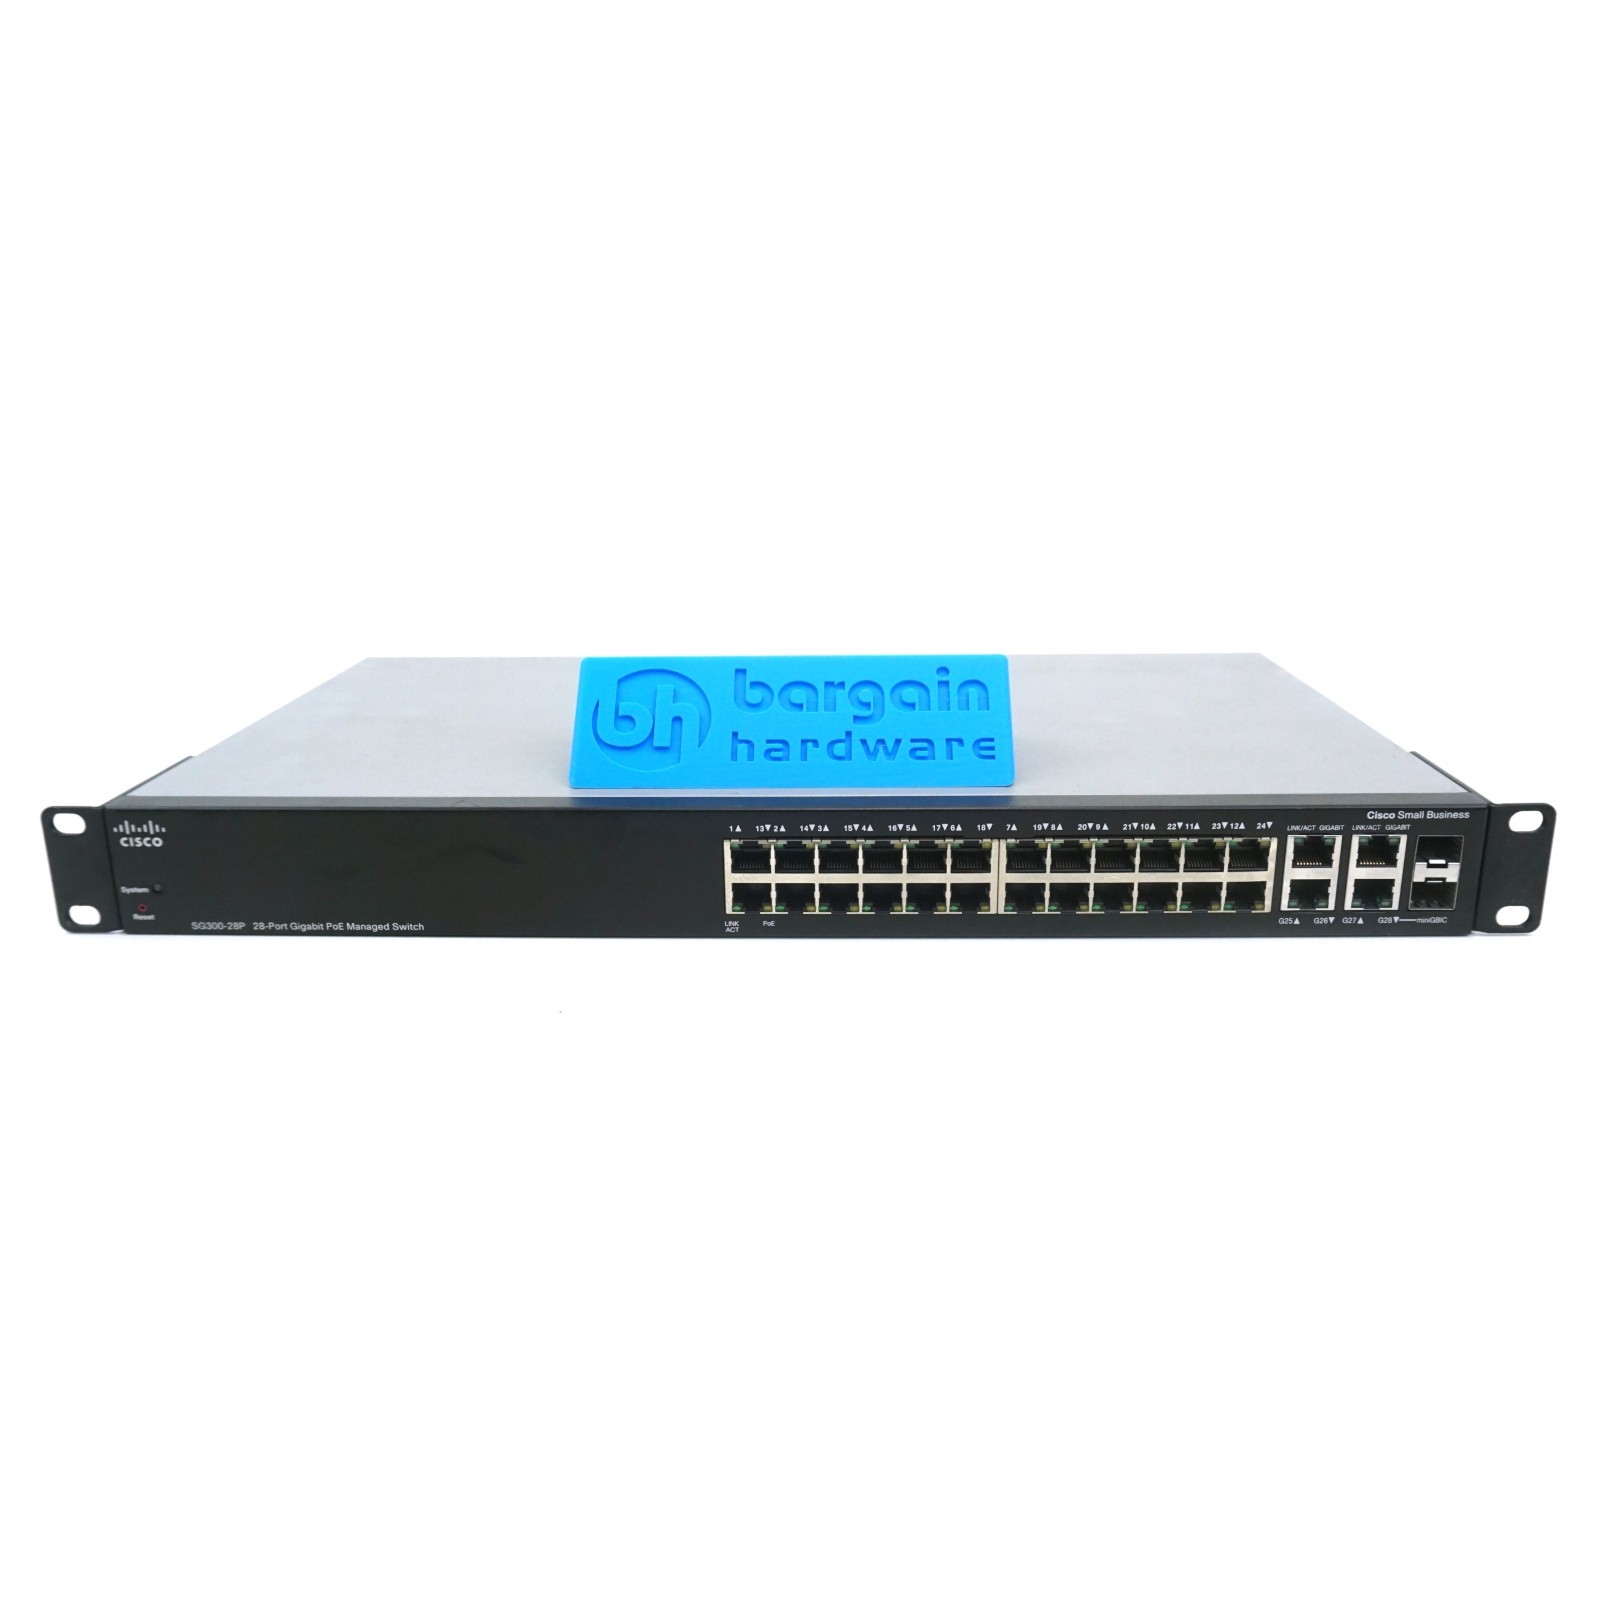 Cisco 300 Series Managed SG300-28P 28 Port RJ-45 PoE Switch With Ears